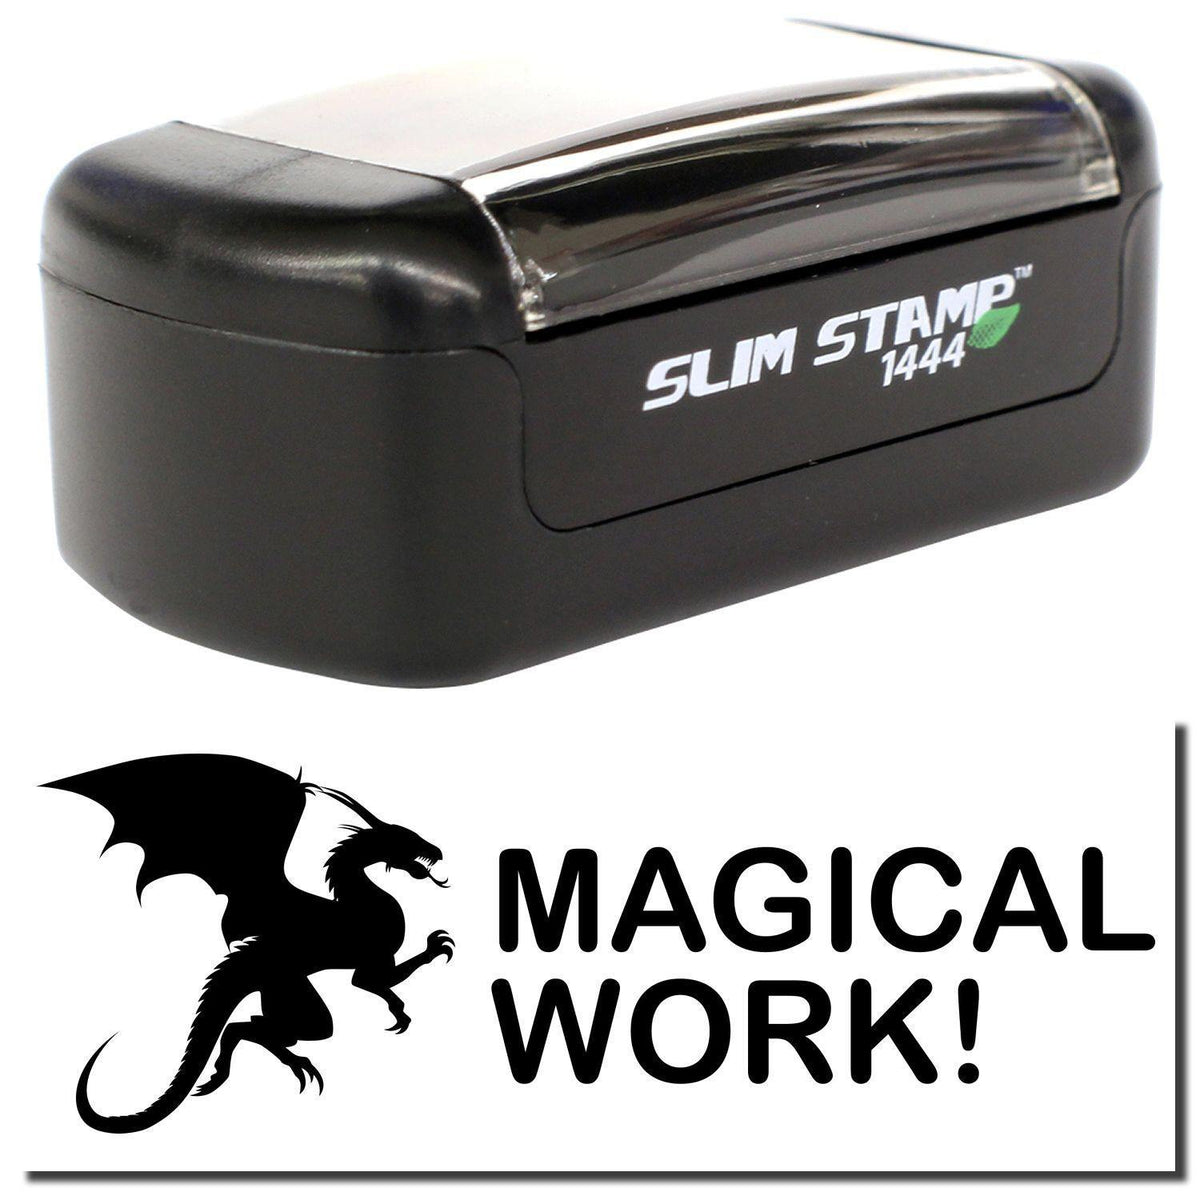 A stock office pre-inked stamp with a stamped image showing how the text &quot;MAGICAL WORK!&quot; with an image of a dragon on the left side is displayed after stamping.